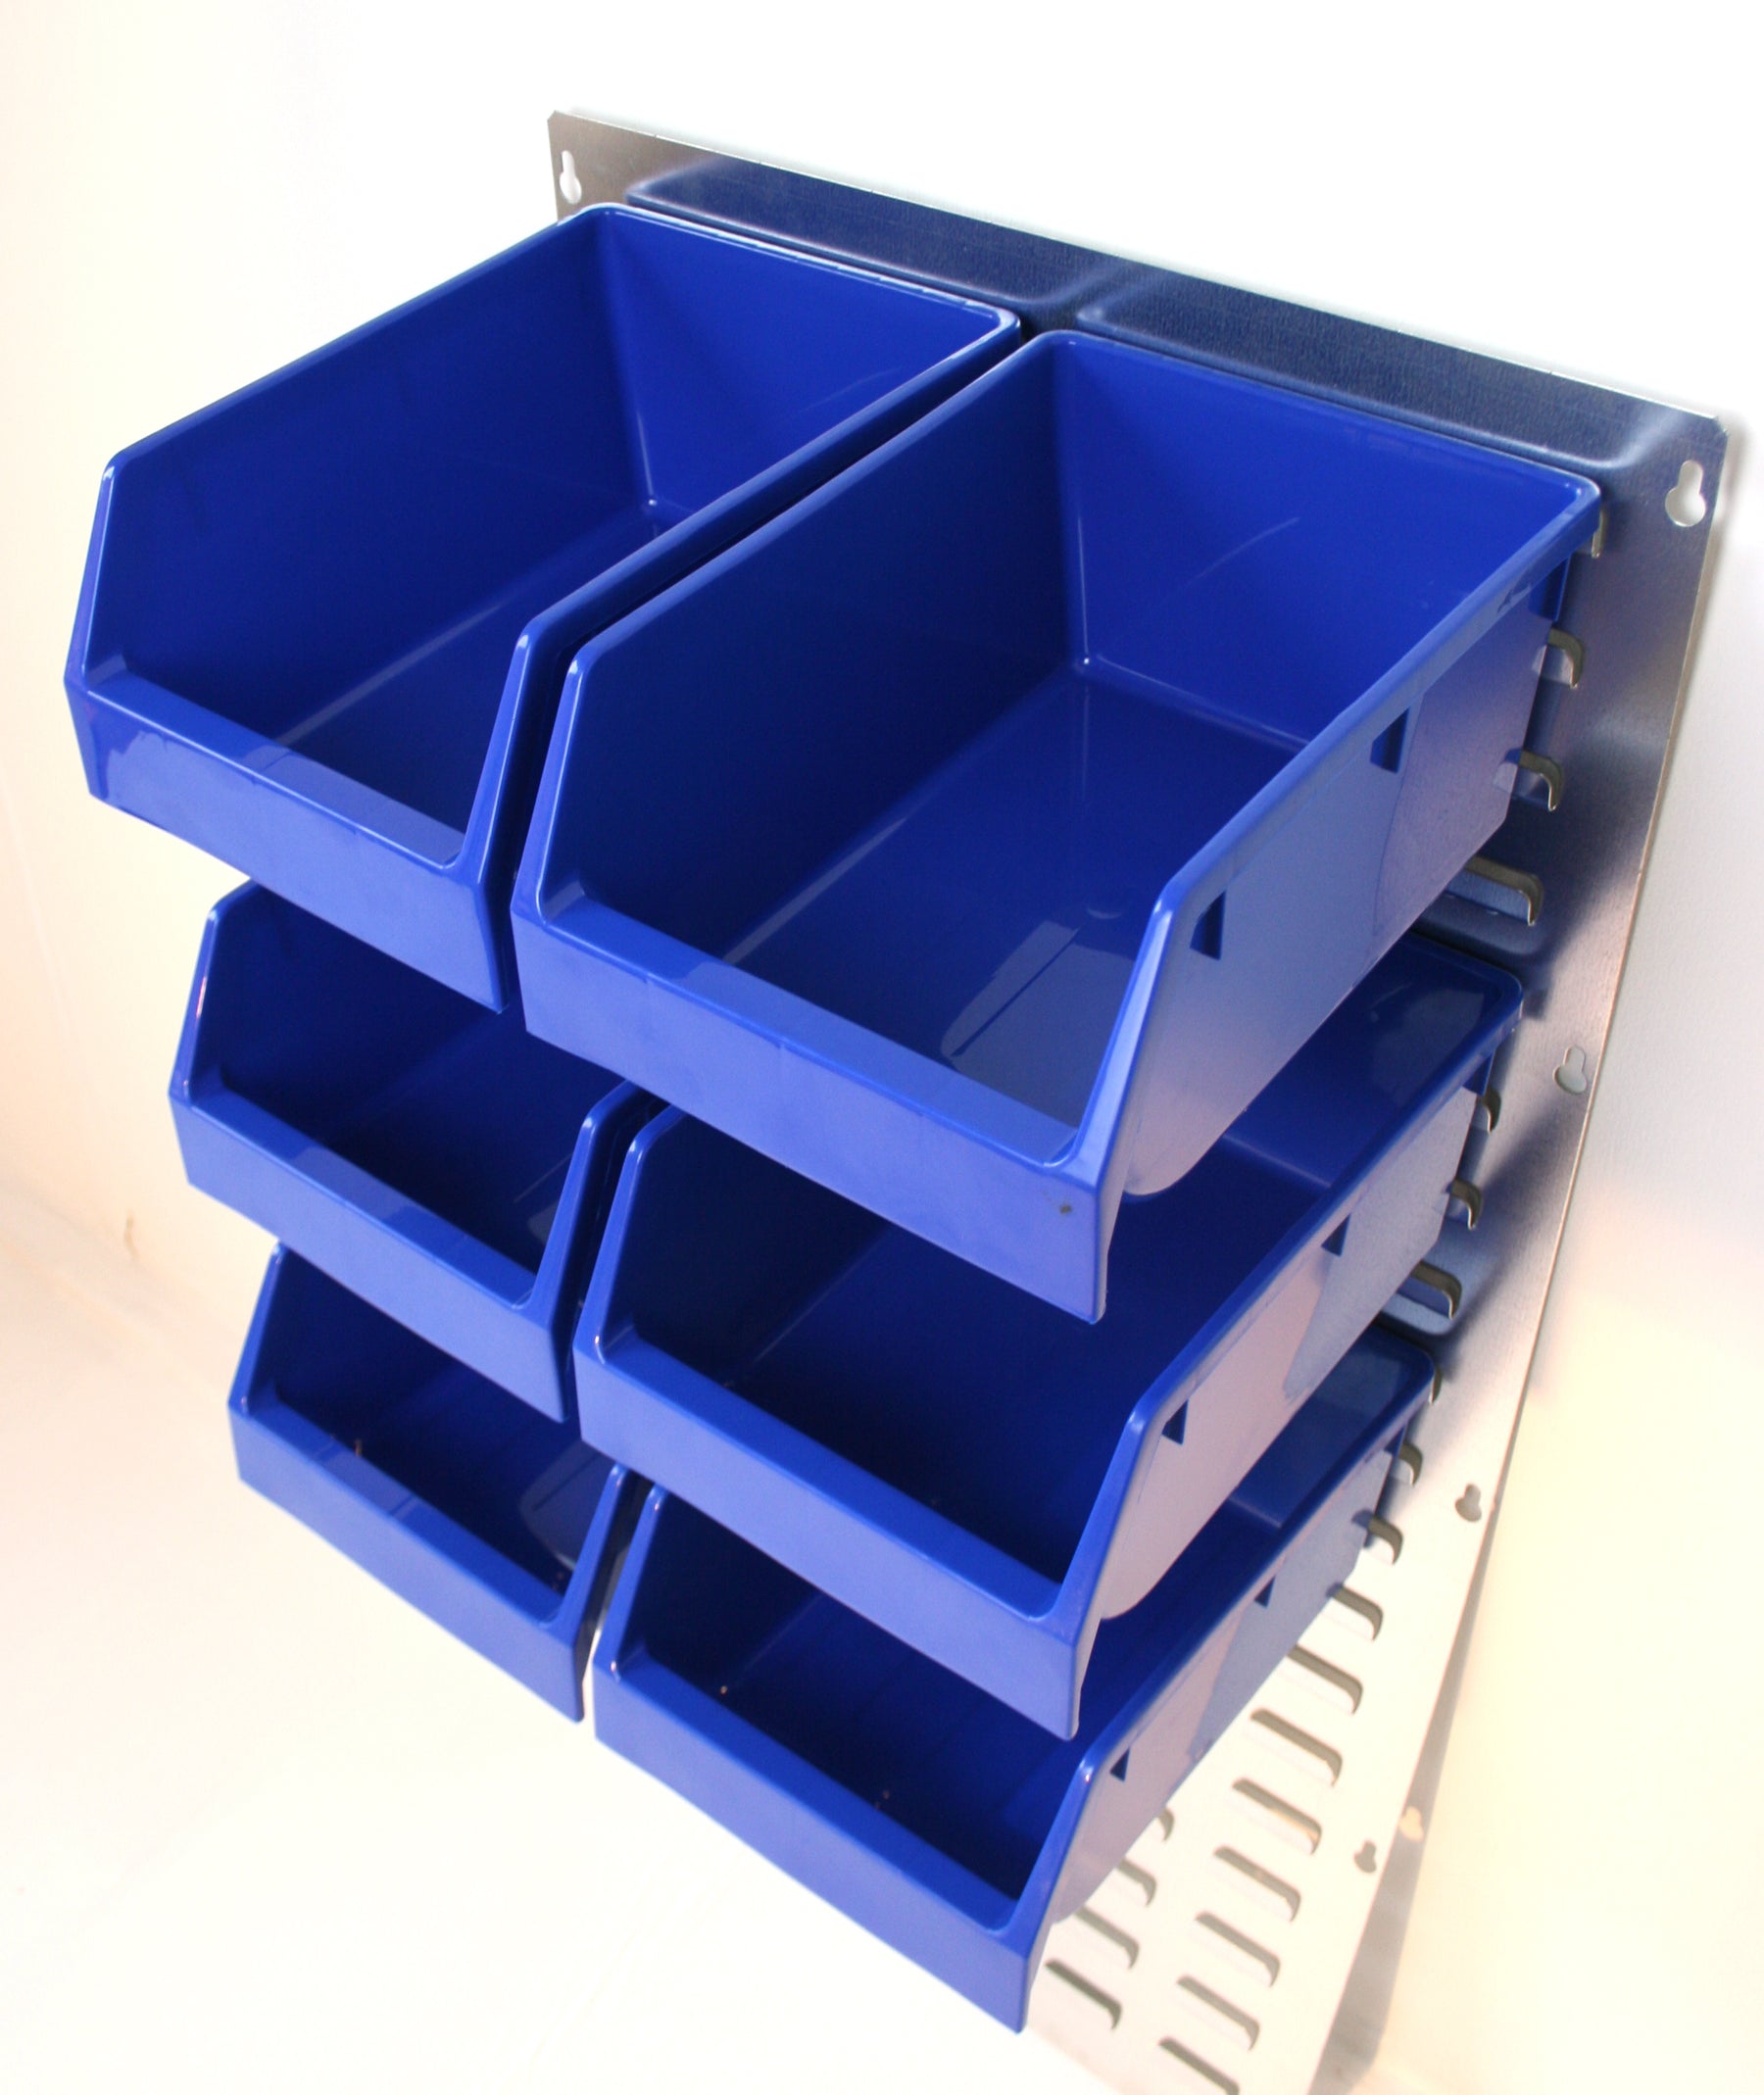 Our Guide to the Parts Storage Bin